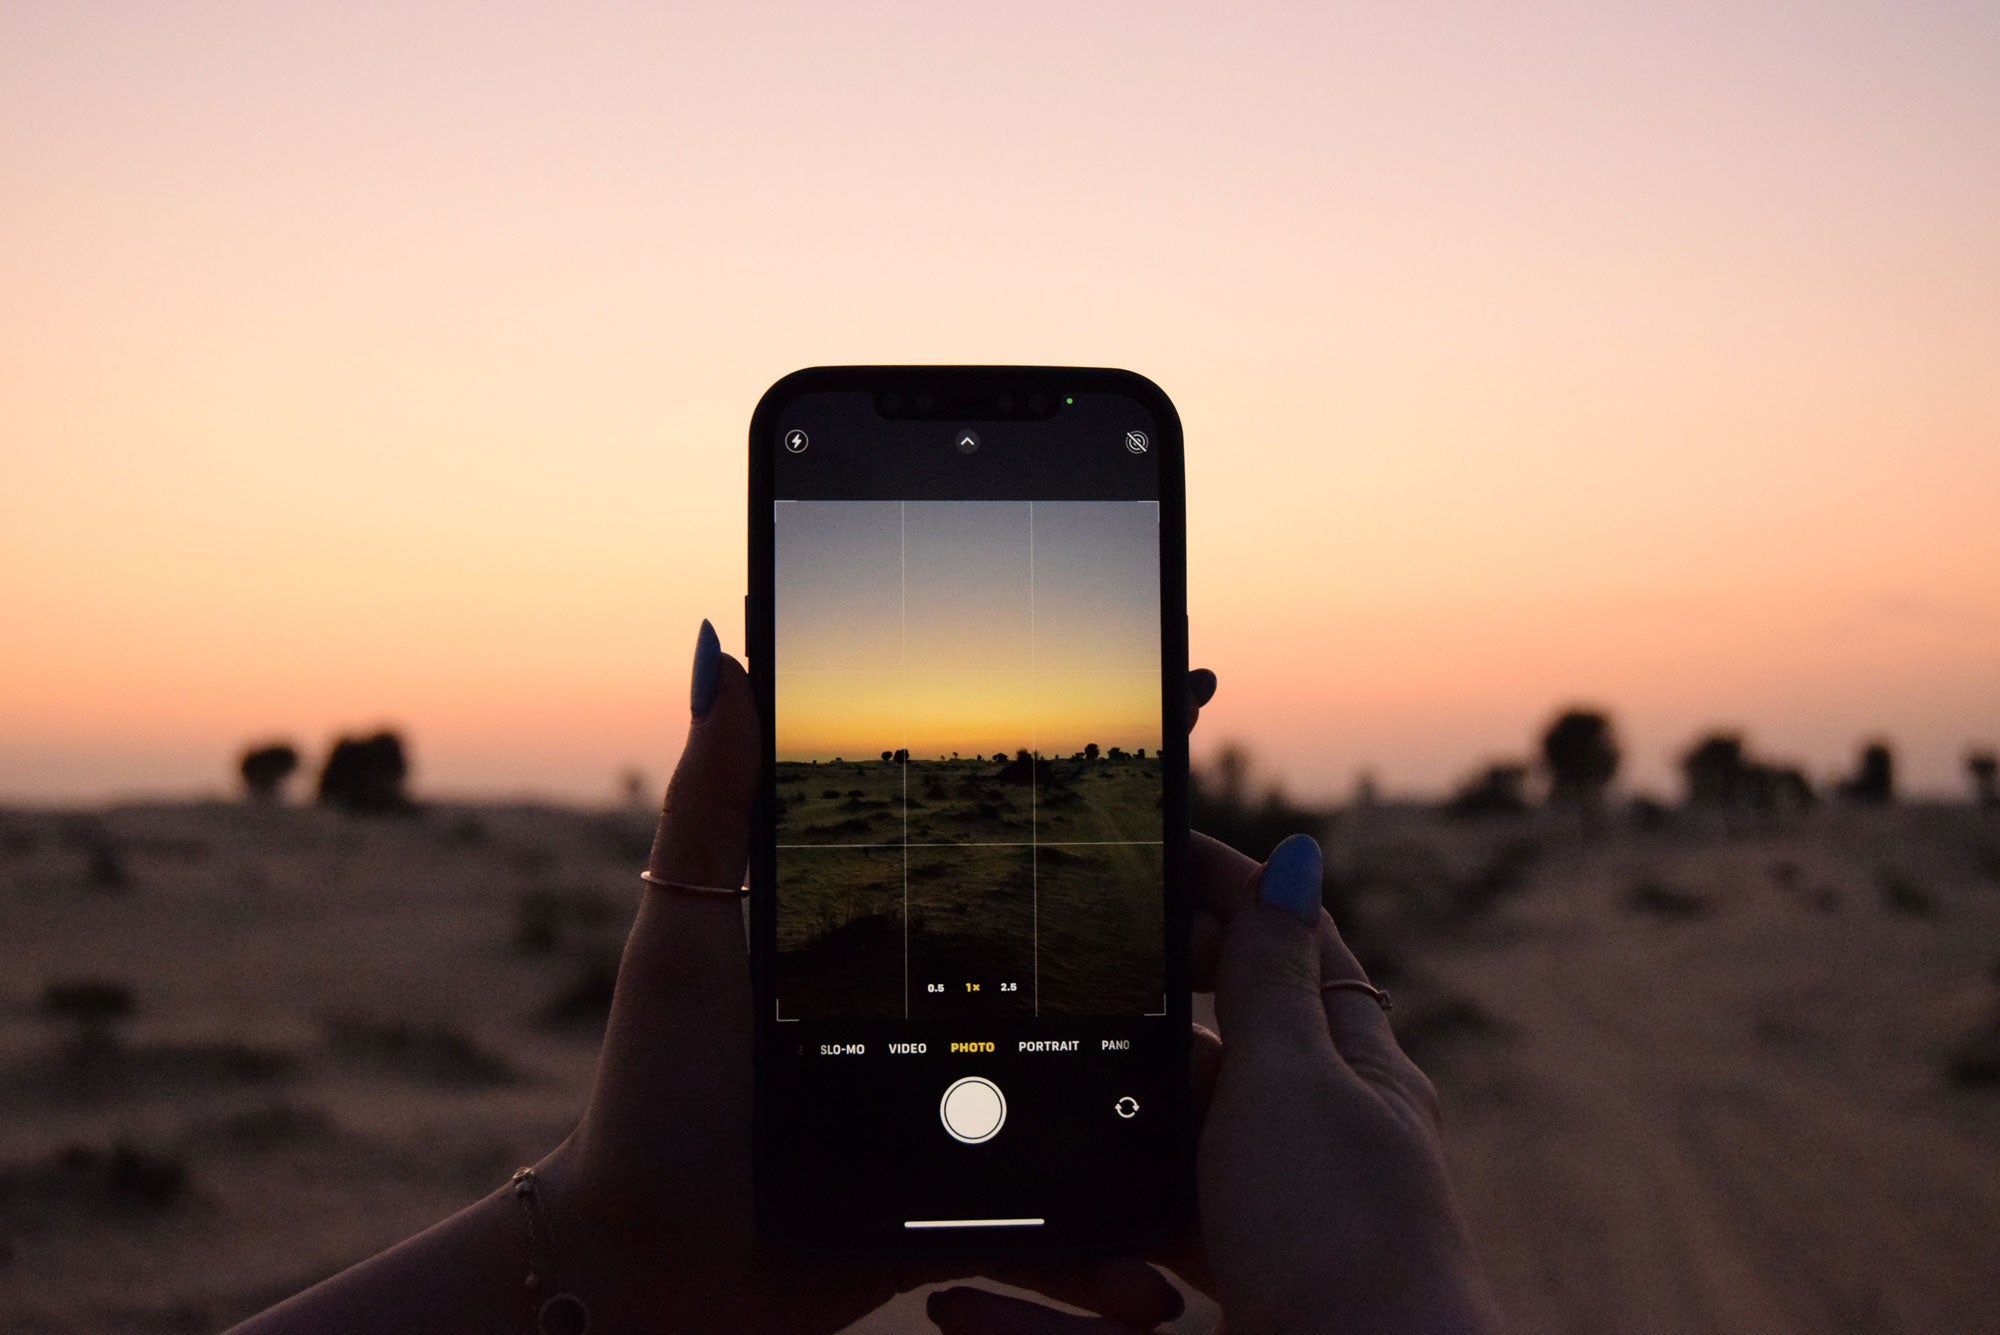 Taking a photo of the sunset using iPhone Camera with Grid Feature